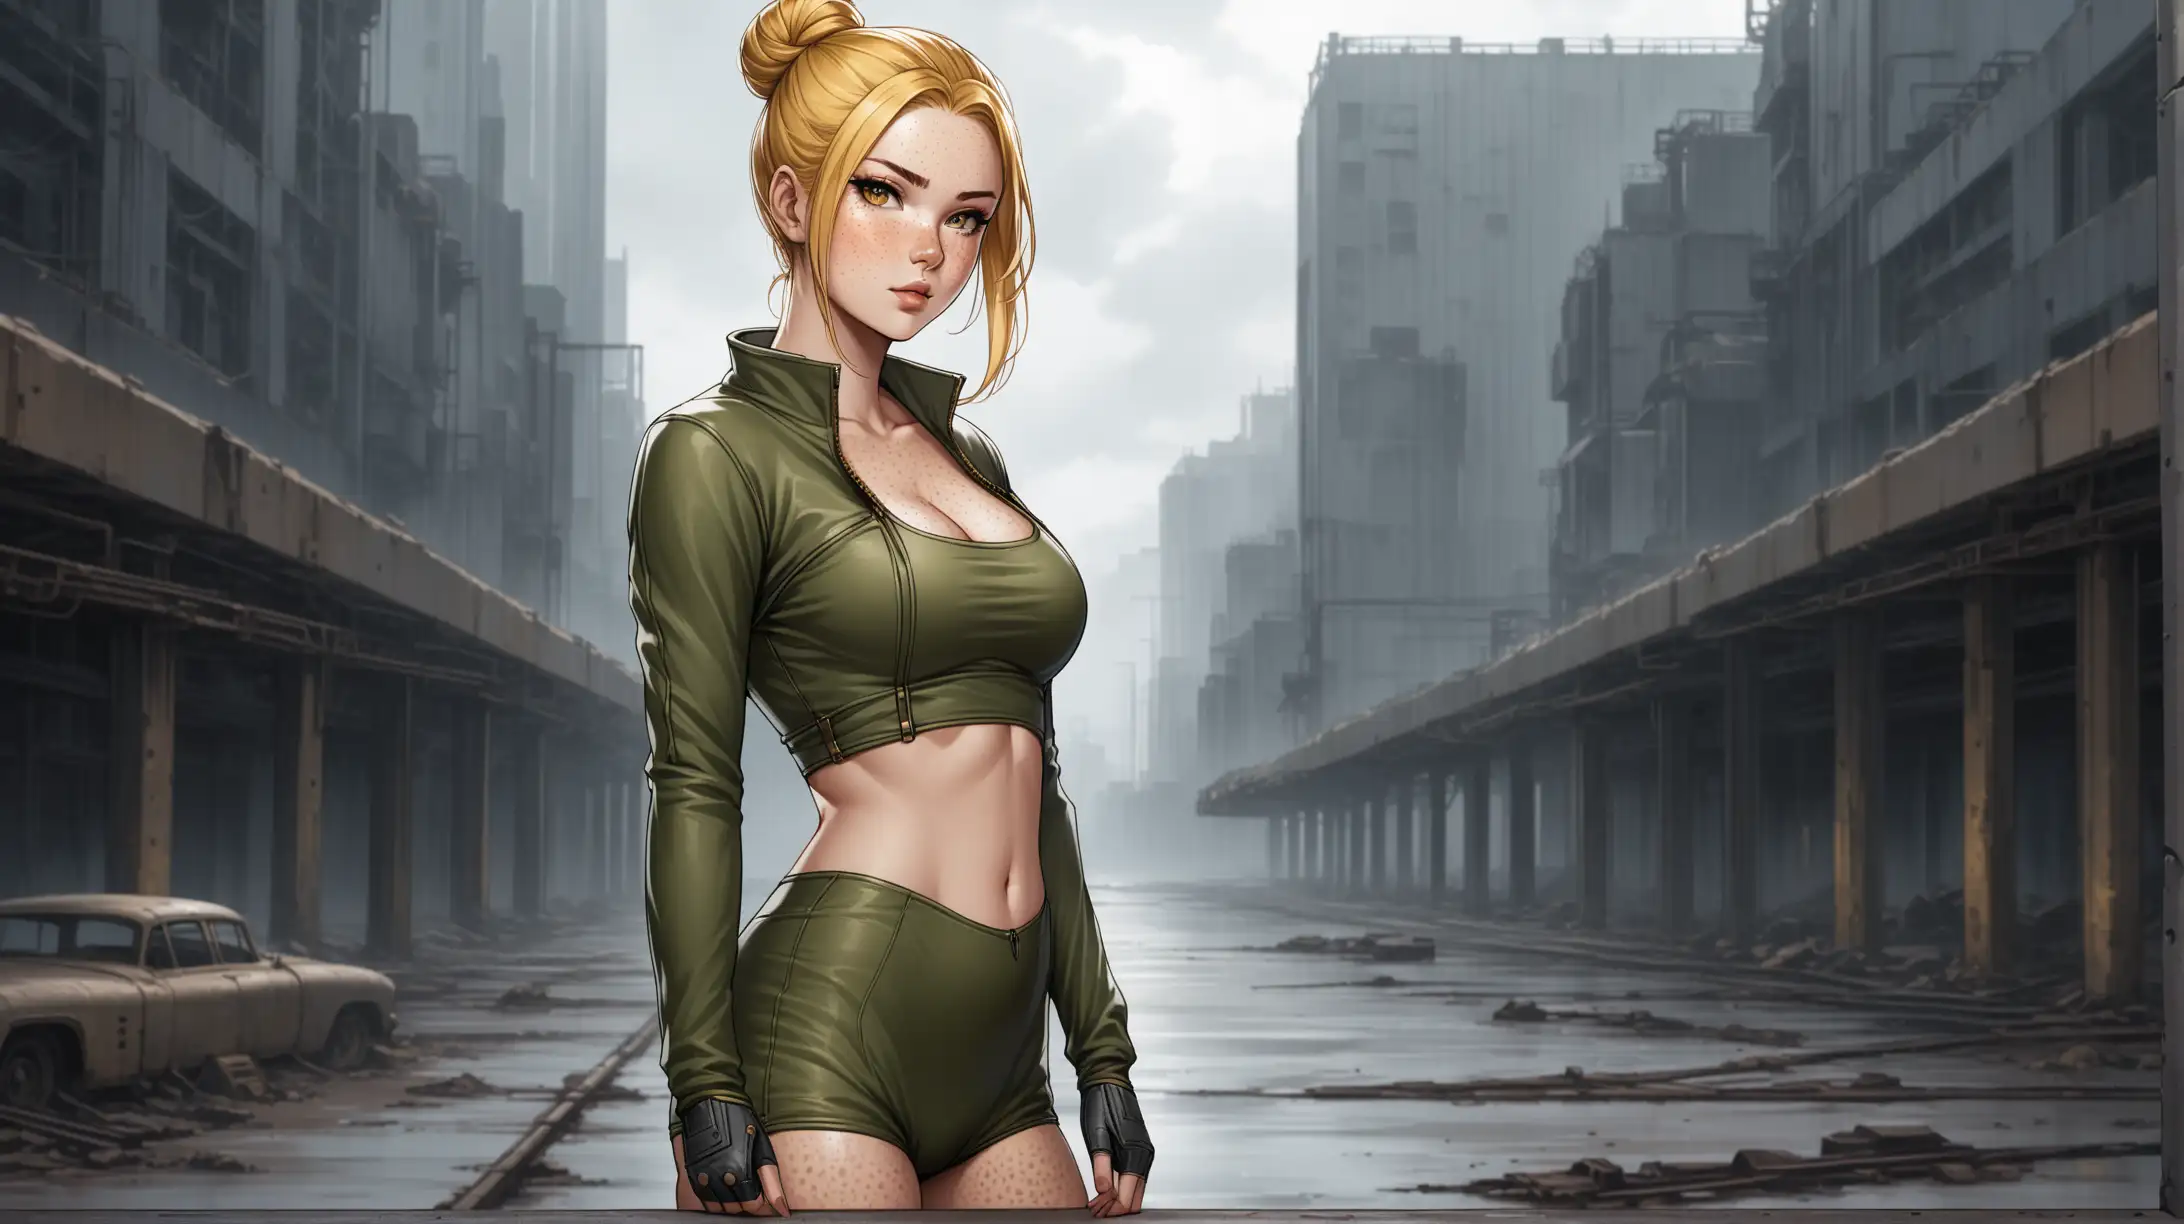 Seductive Fallout Inspired Blonde Woman in Urban Setting